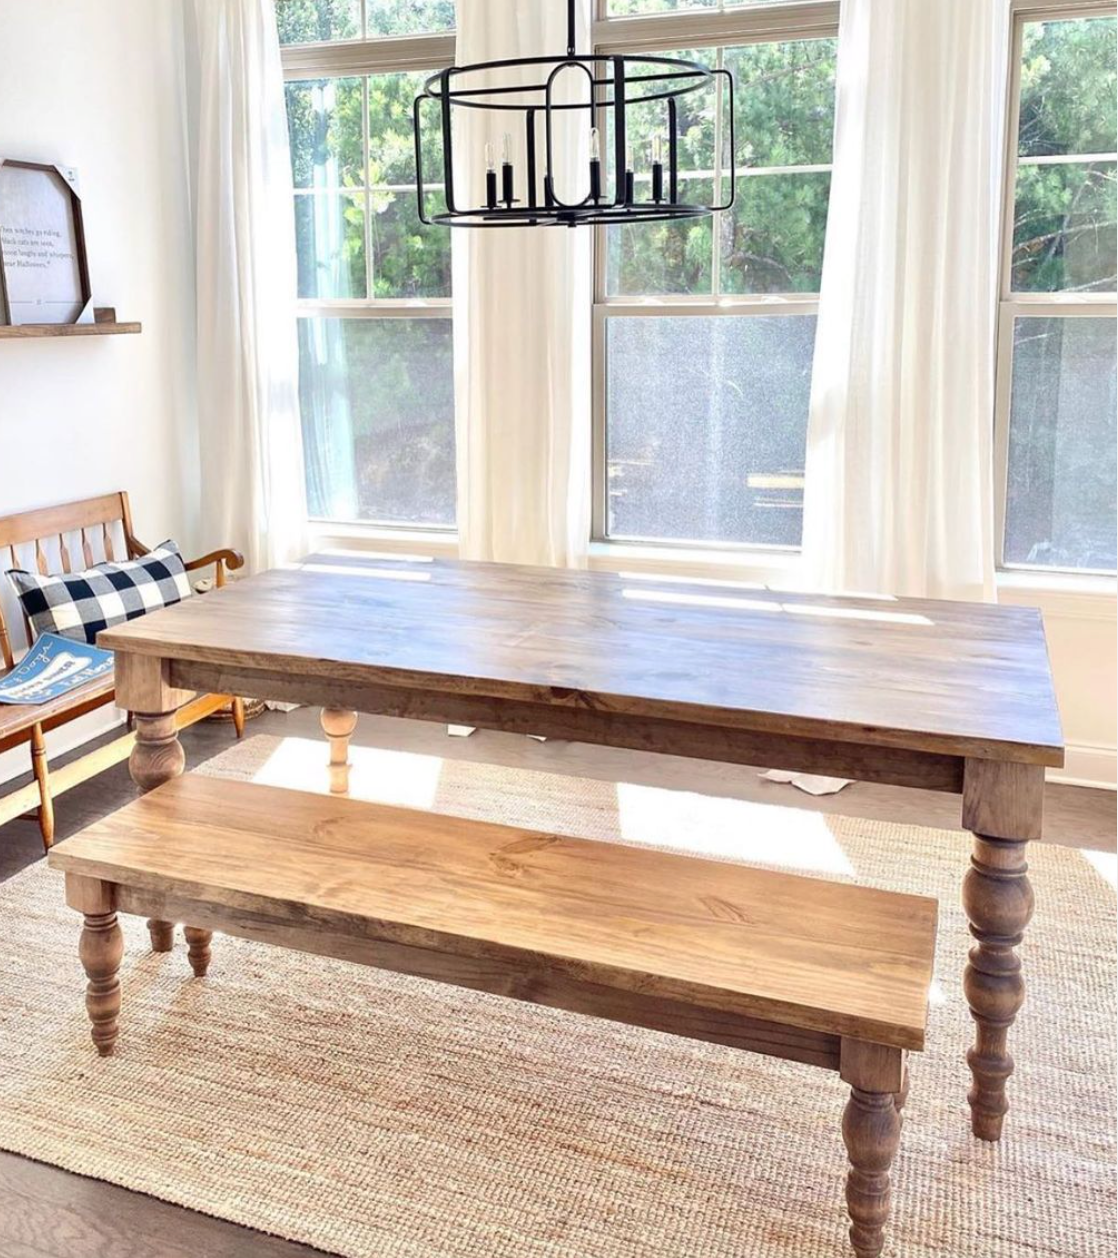 Beautiful bench and dining table set featuring Carolina Leg Co Modern Chunky Farmhouse Dining Table Legs and Bench Legs - Sustainably Sourced American Pine - Set of 4 dining legs and 4 bench legs- Handmade in NC